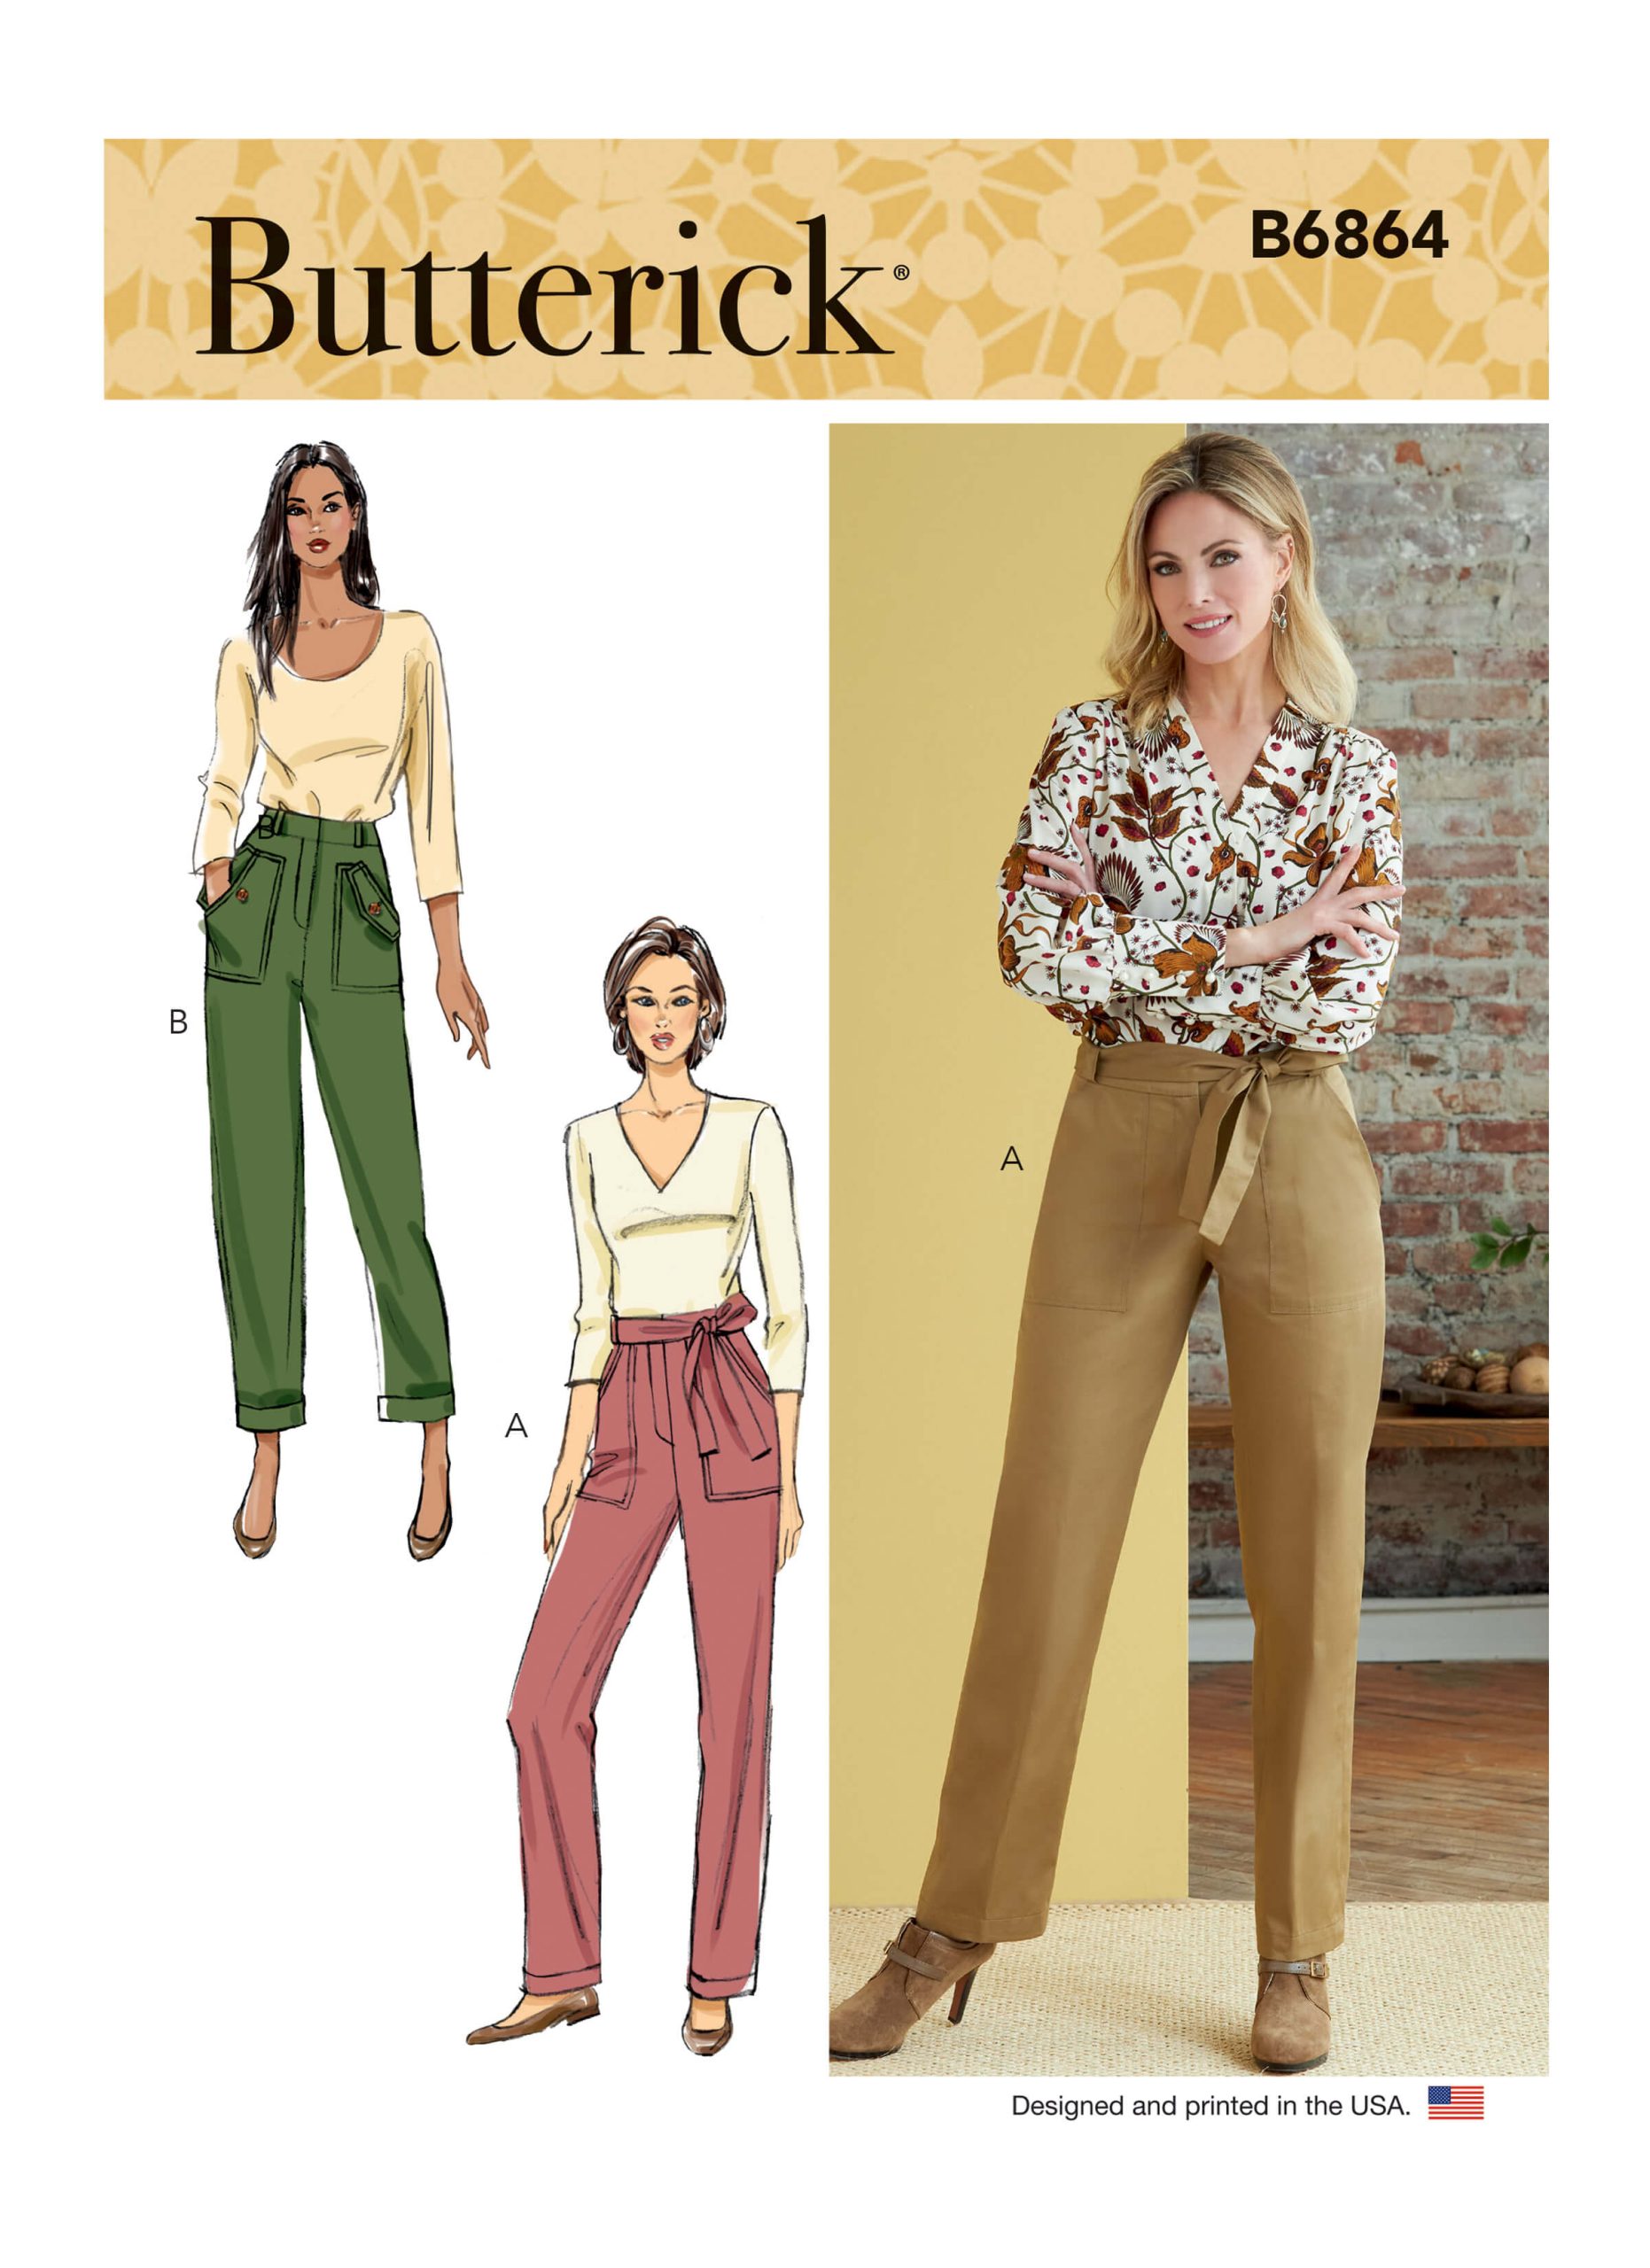 Butterick Sewing Pattern B6864 Misses' Trousers and Sash